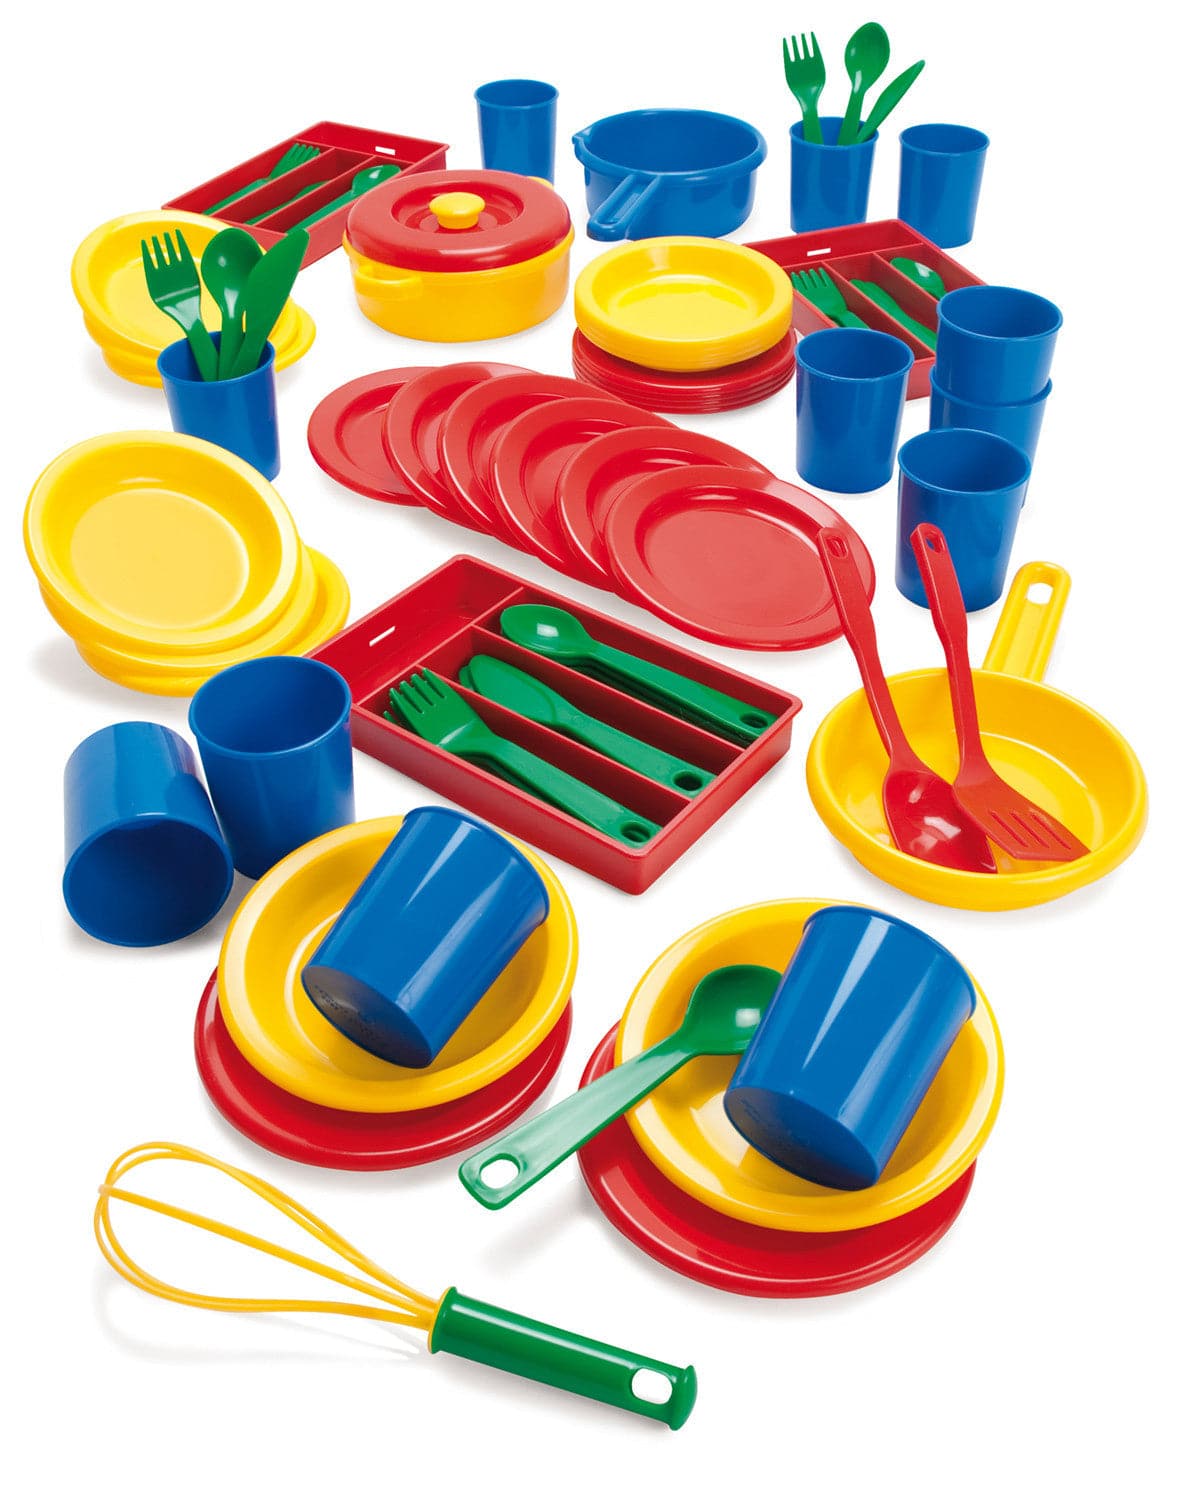 Large Plastic Role Play Dining Set, A complete set of brightly coloured, dishwasher safe kitchen accessories.Enough pans and dishes to get you cooking a feast and everything you need to eat it with. Colours may vary. The perfect set for enhancing your home corner. Watch as children create cafes, restaurants or just a cosy kitchen. The Large Plastic Role Play Dining Set can be cleaned with denatured alcohol, is dishwasher safe and can be washed in hand with water and soap. This resource can be washed again a